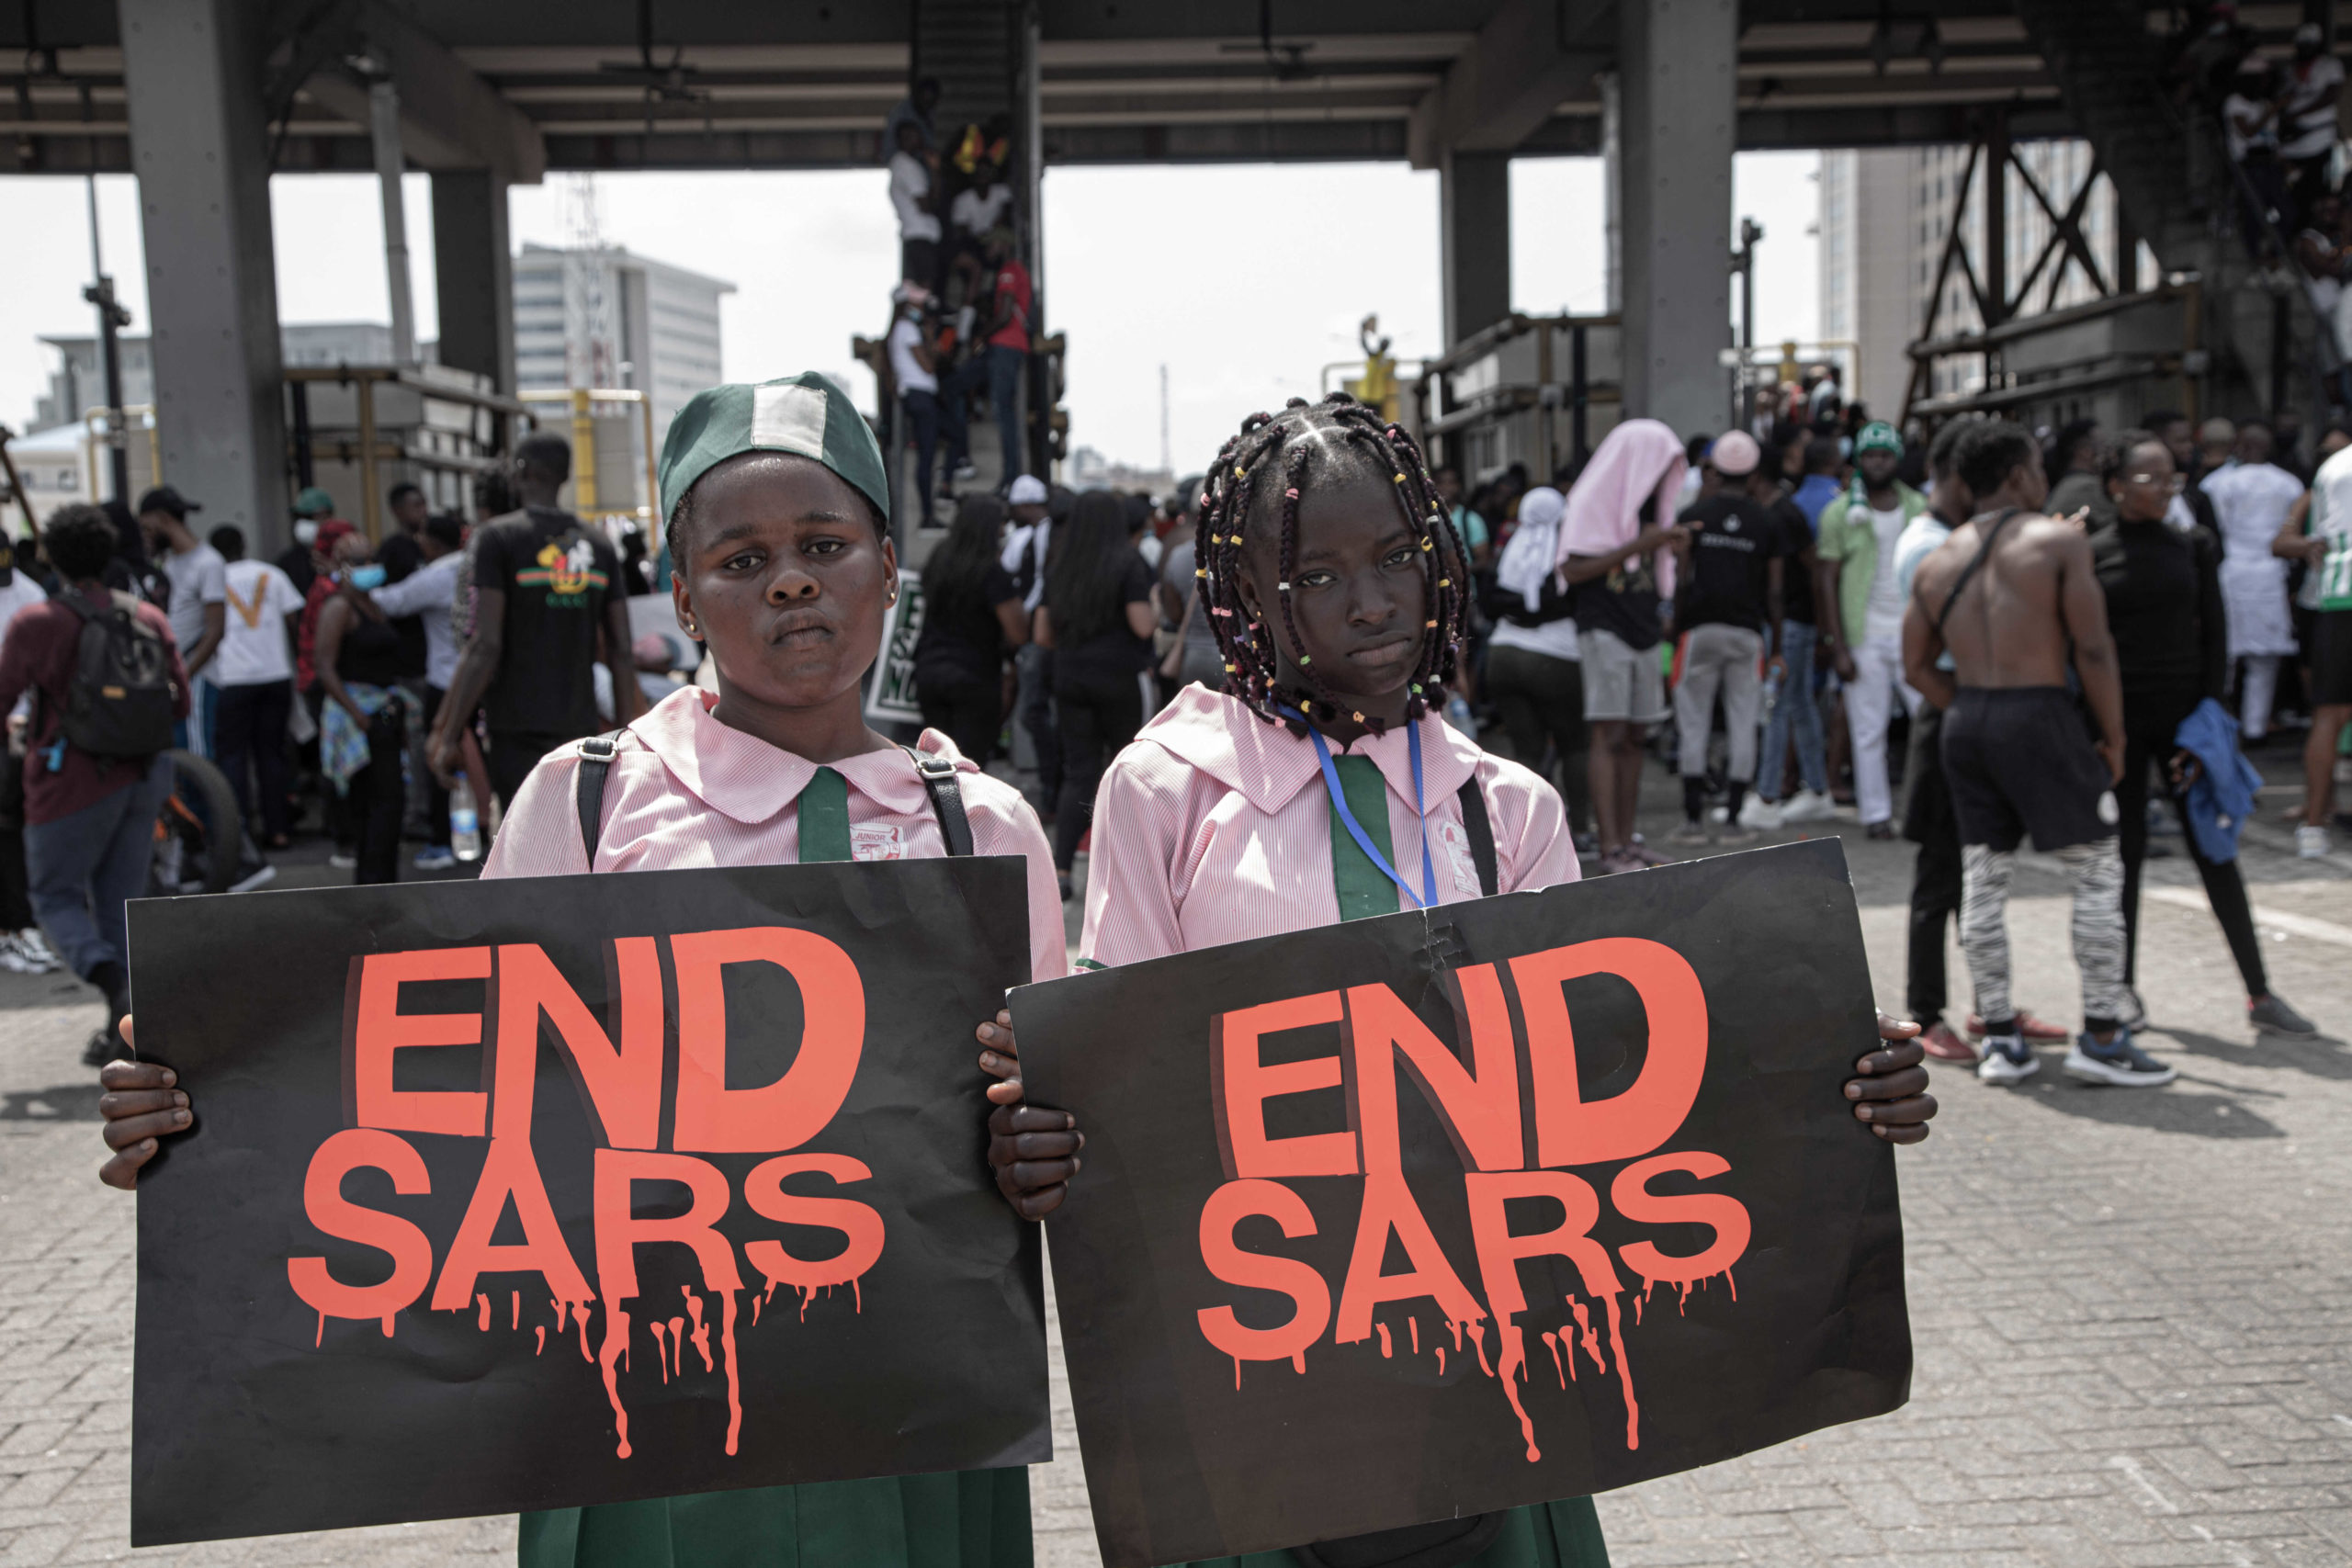 #EndSARS protests in Nigeria show that the youth wants change, now